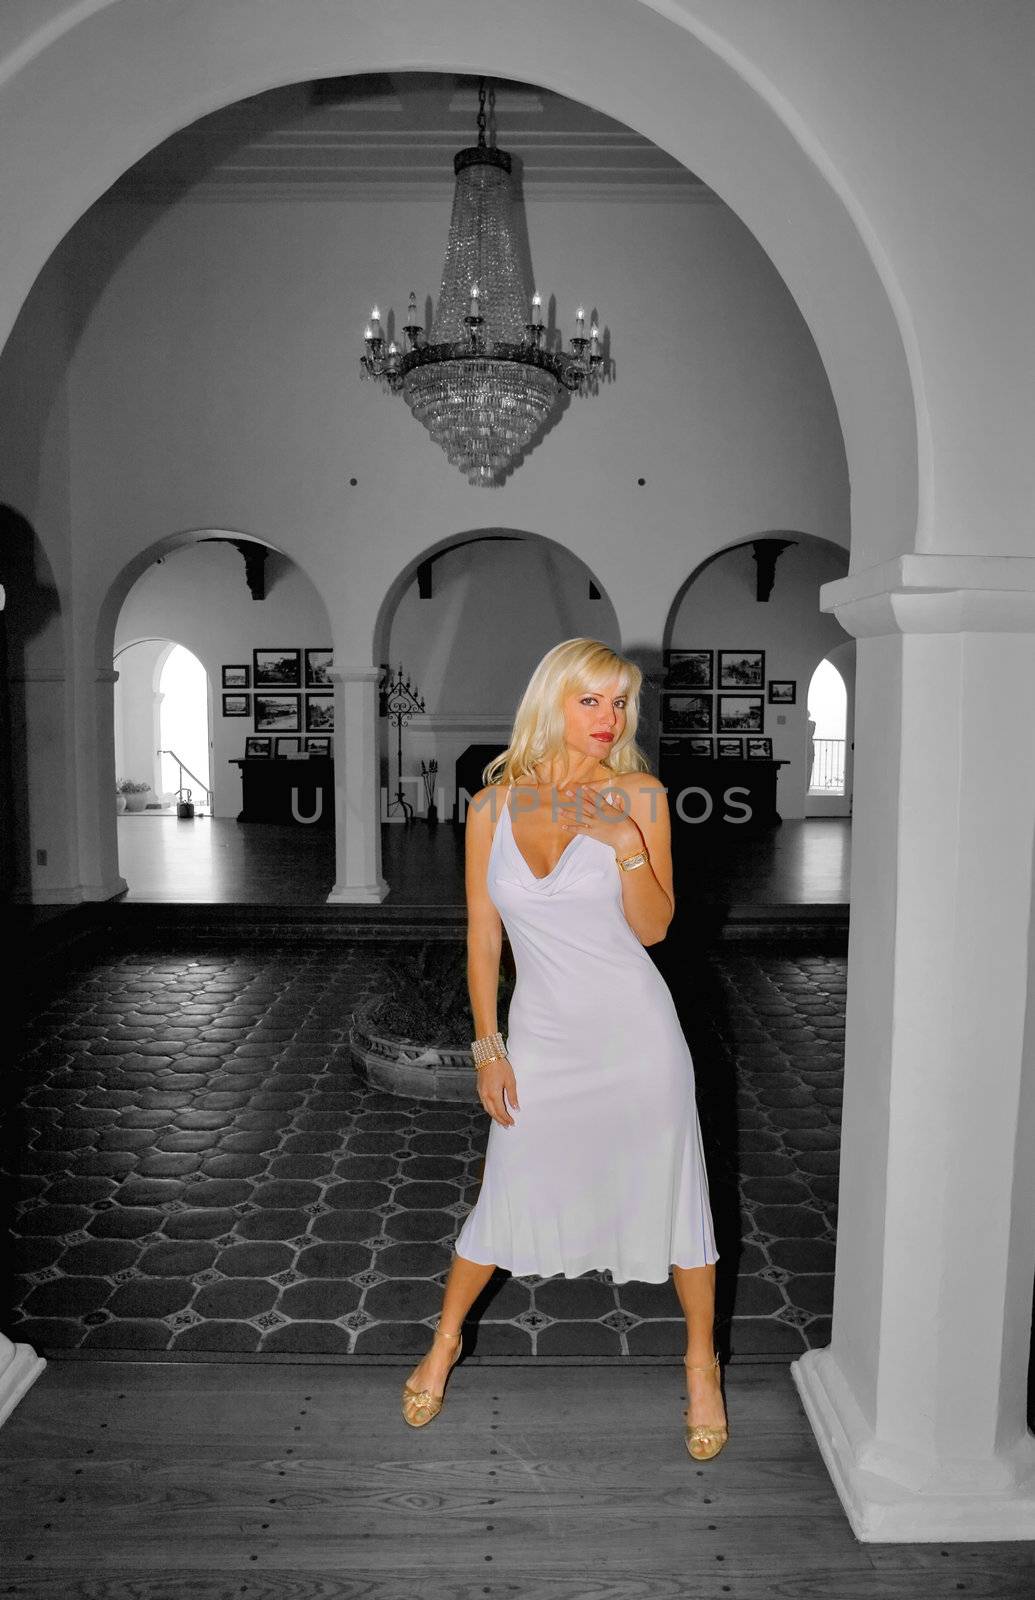 Blond Woman wearing a White Dress B&W and Color by KevinPanizza